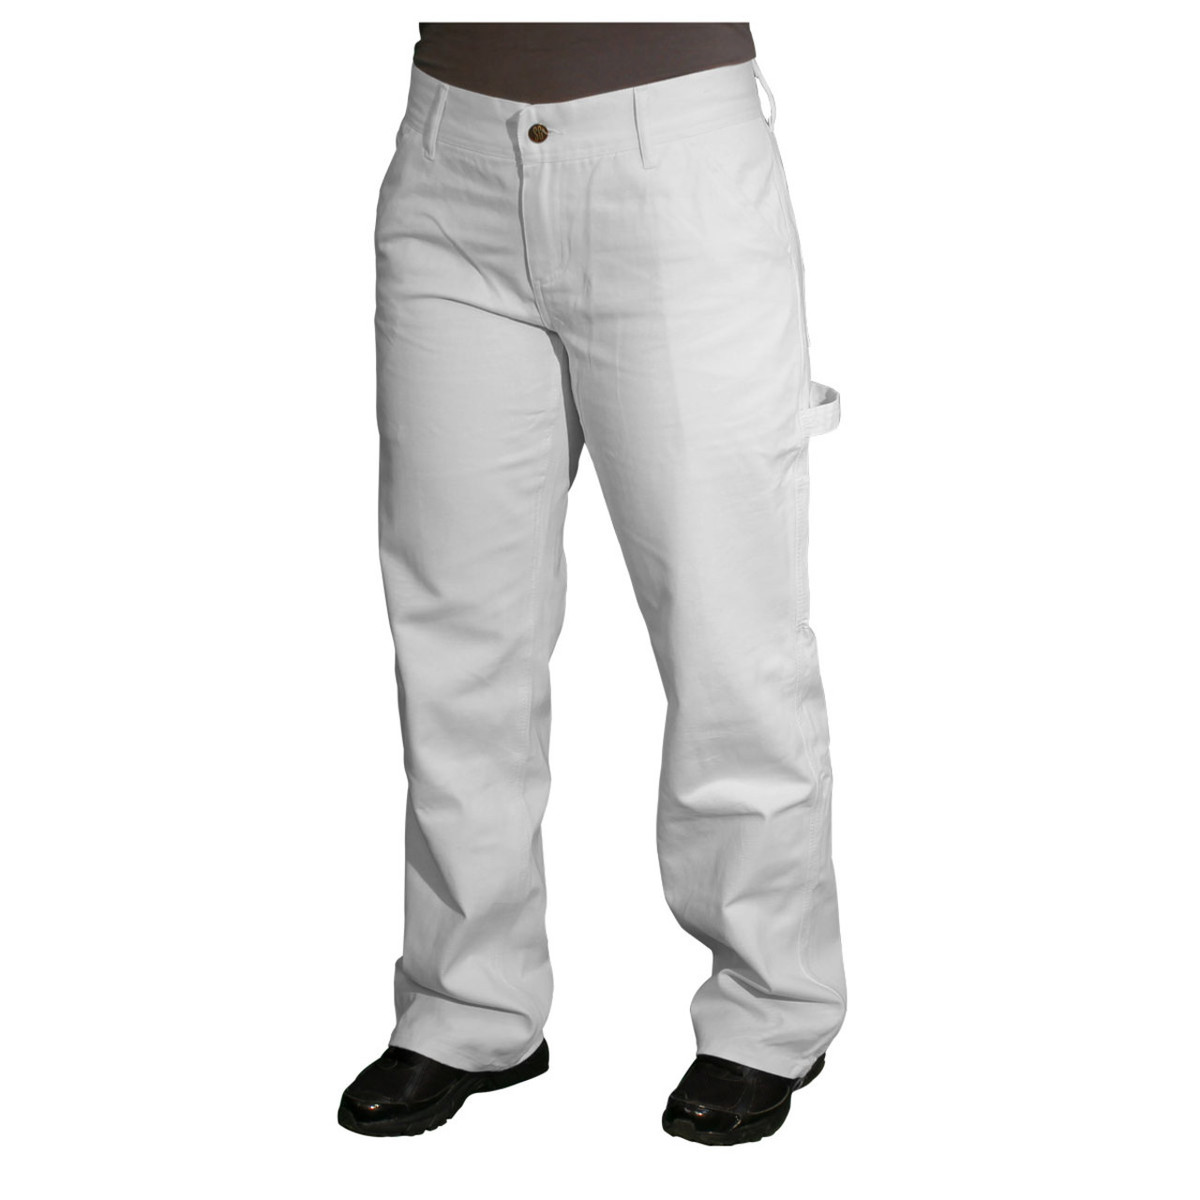 White Painters Bib and Brace With Multiple Pockets | Bodyguard Workwear